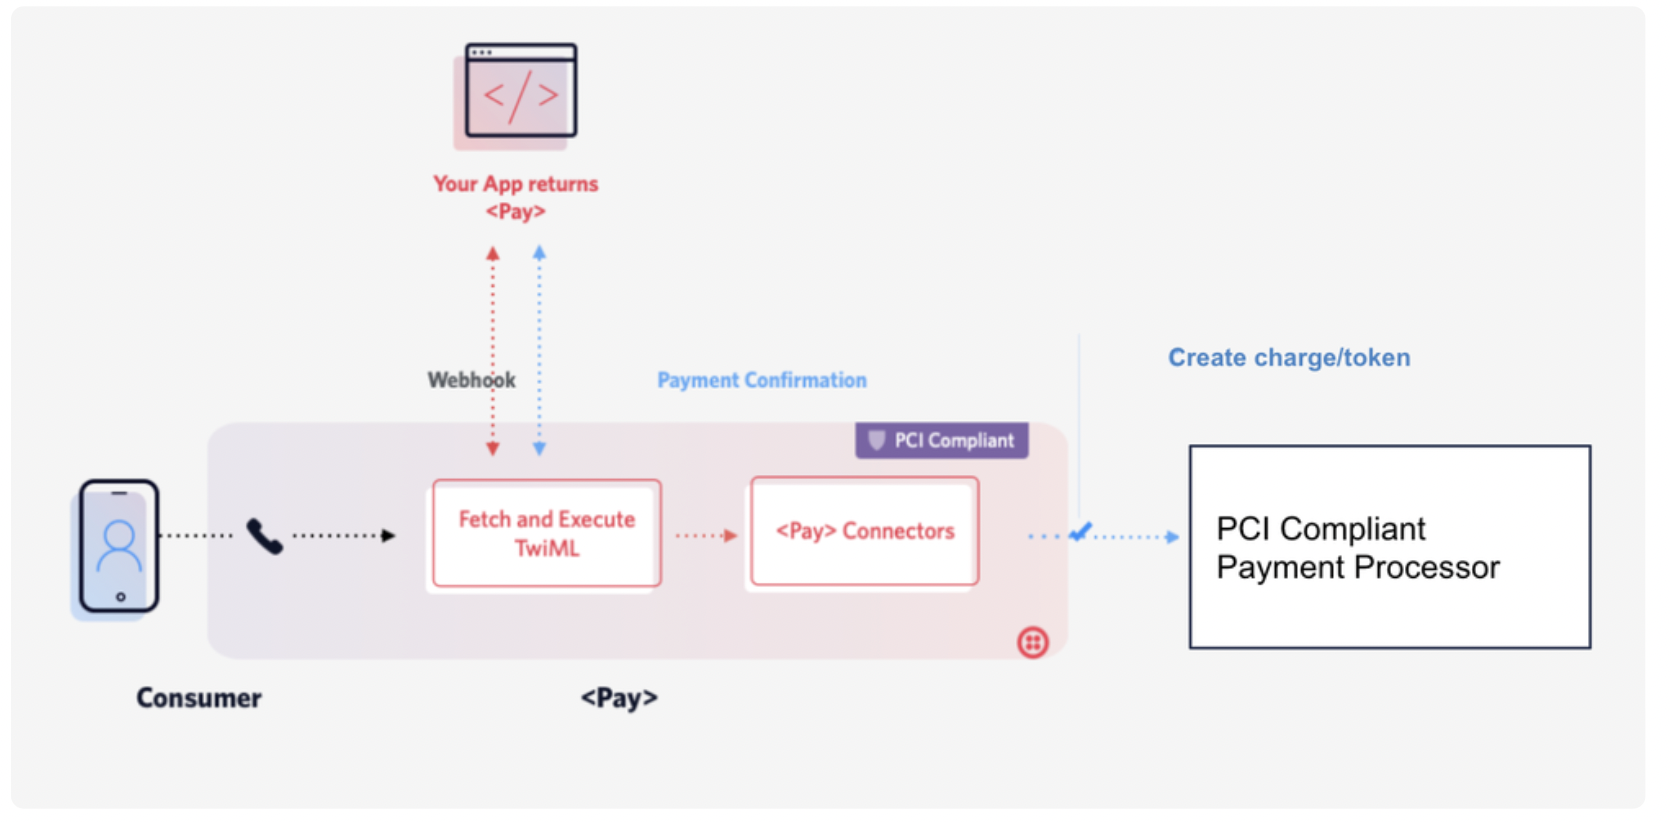 Generic Pay Connector Architecture